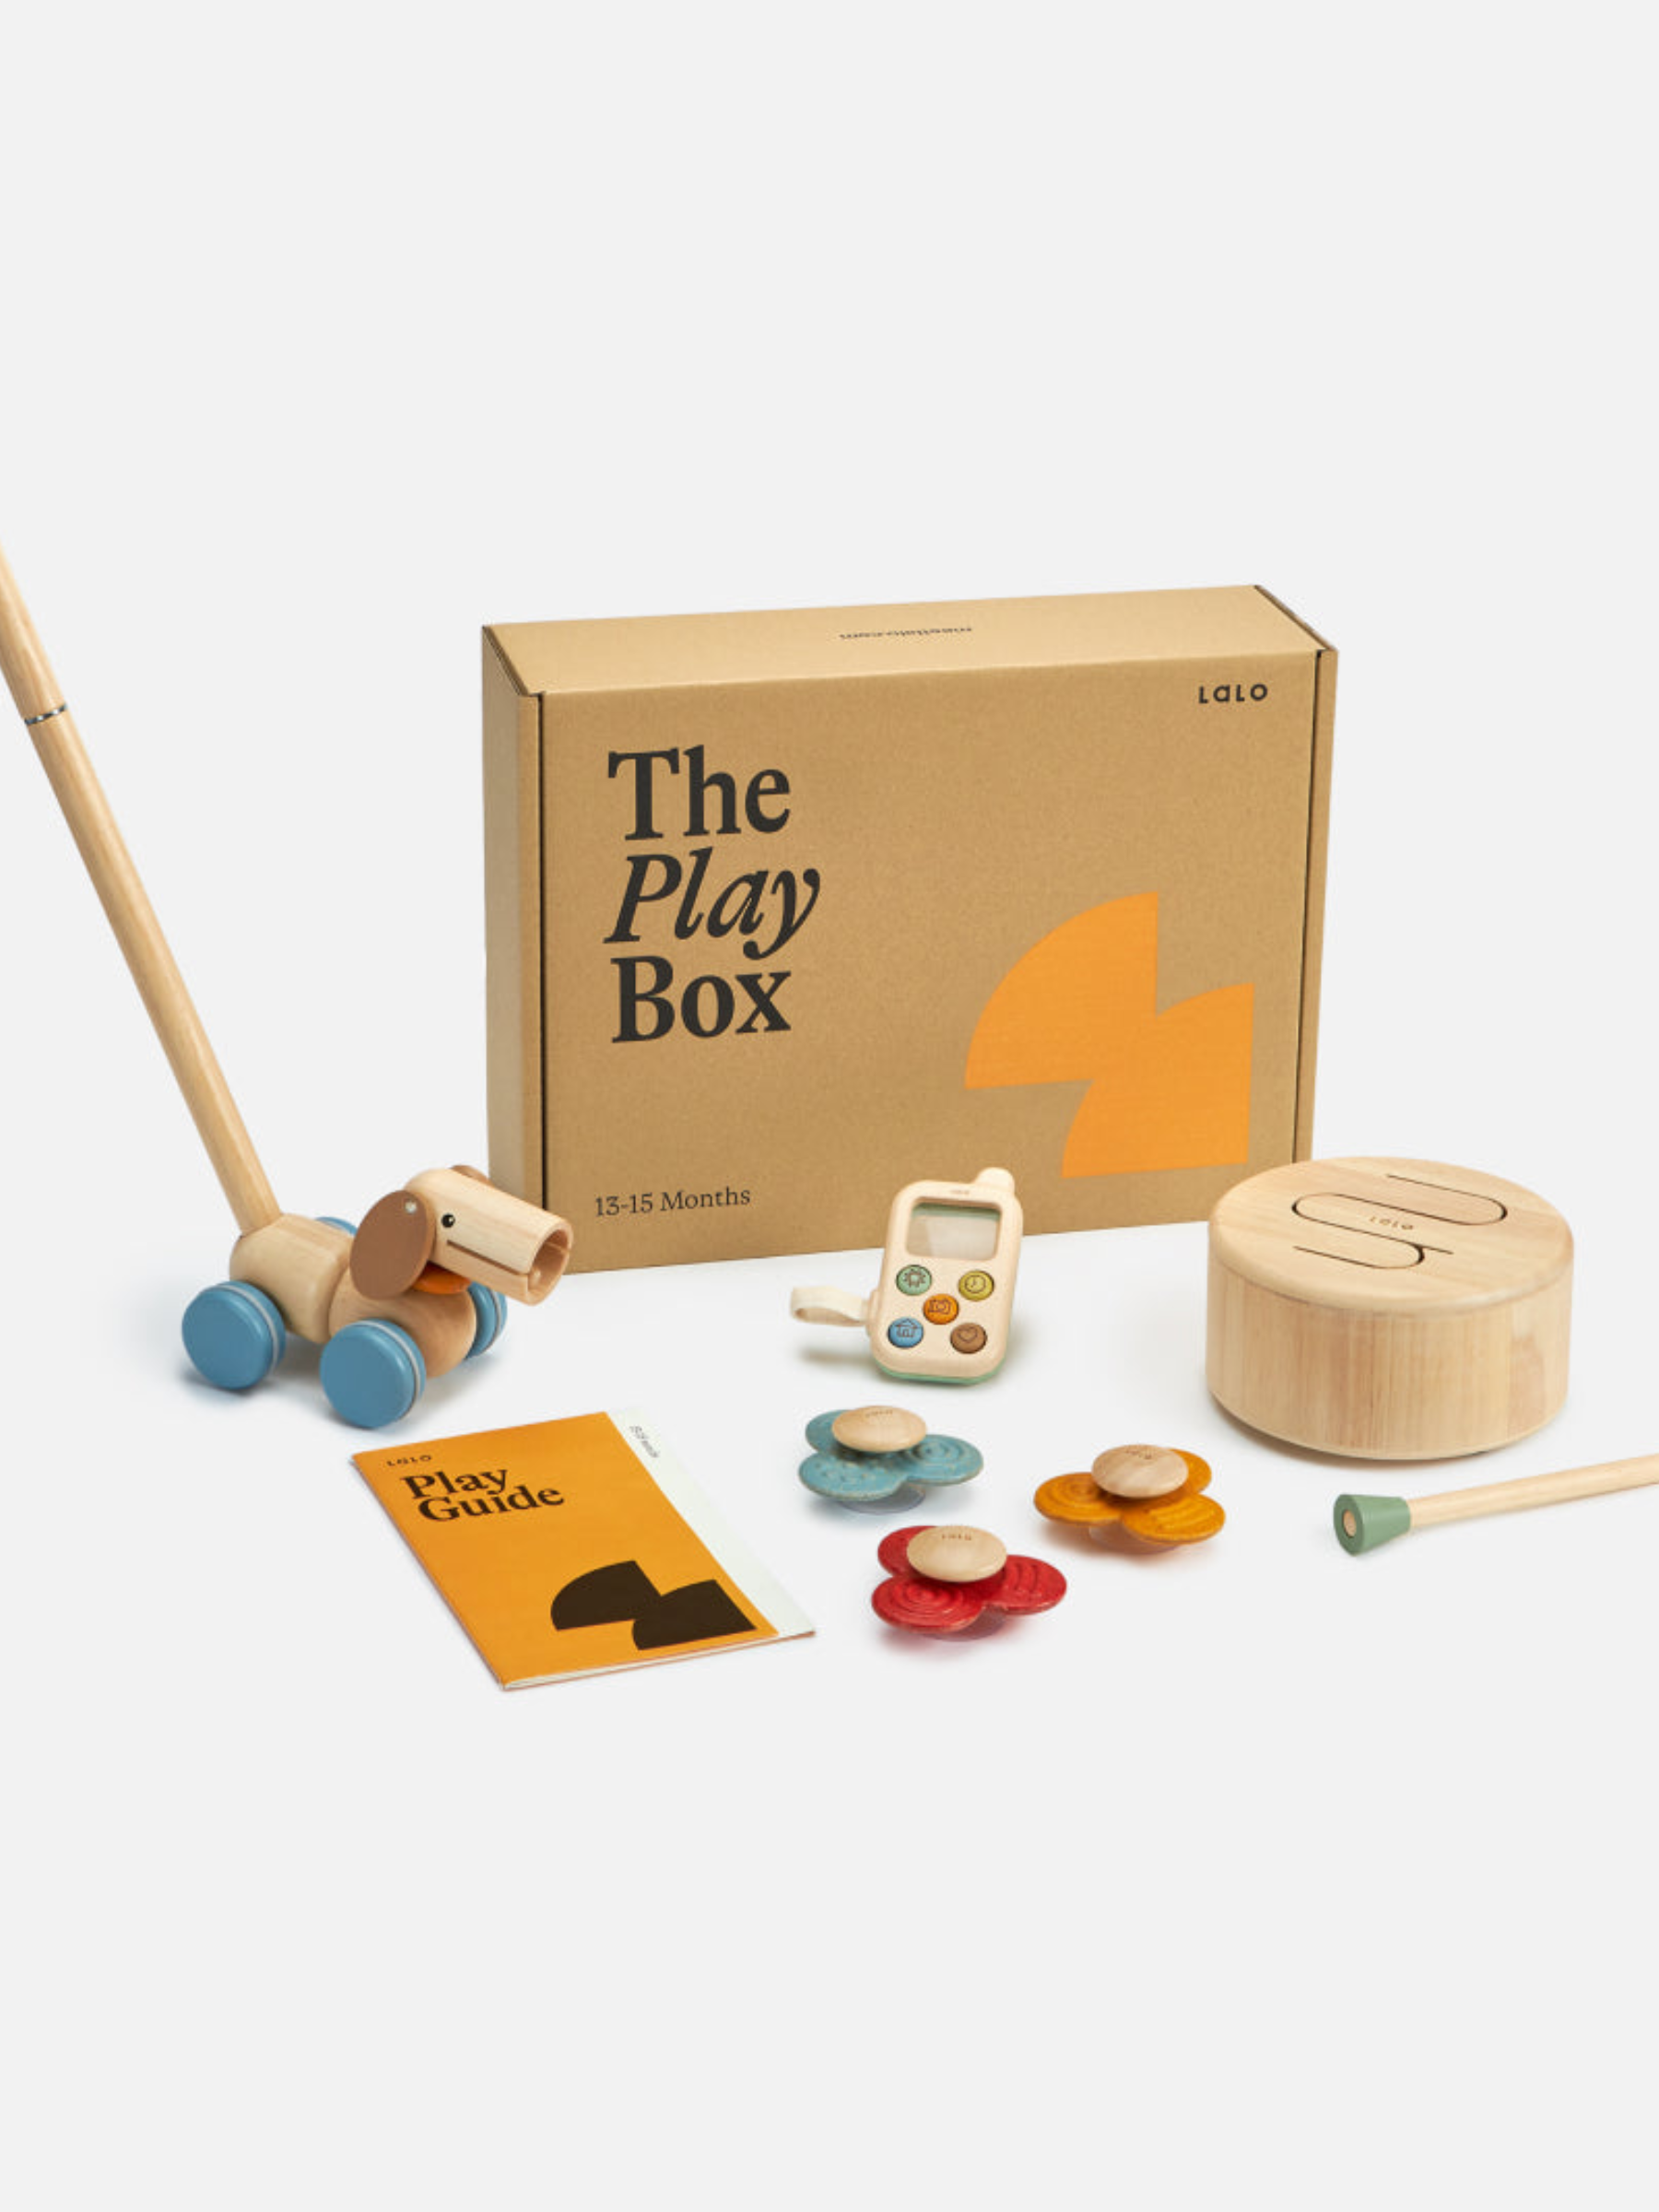 You don’t have to do all kinds of research to find out what kind of toys are developmentally-appropriate for a one-year-old—you can just buy this curated kit from Lalo. Each “play box” is filled with sustainably-made, non-toxic toys that support specific stages of growth. My twins recently received a box, and we were blown away how beautifully-made everything is. Even better, they’ve held the kids’ attention for weeks. $135, Lalo. <a href="https://www.meetlalo.com/products/the-play-box-13-15-months">Get it now!</a><p>Sign up for today’s biggest stories, from pop culture to politics.</p><a href="https://www.glamour.com/newsletter/news?sourceCode=msnsend">Sign Up</a>